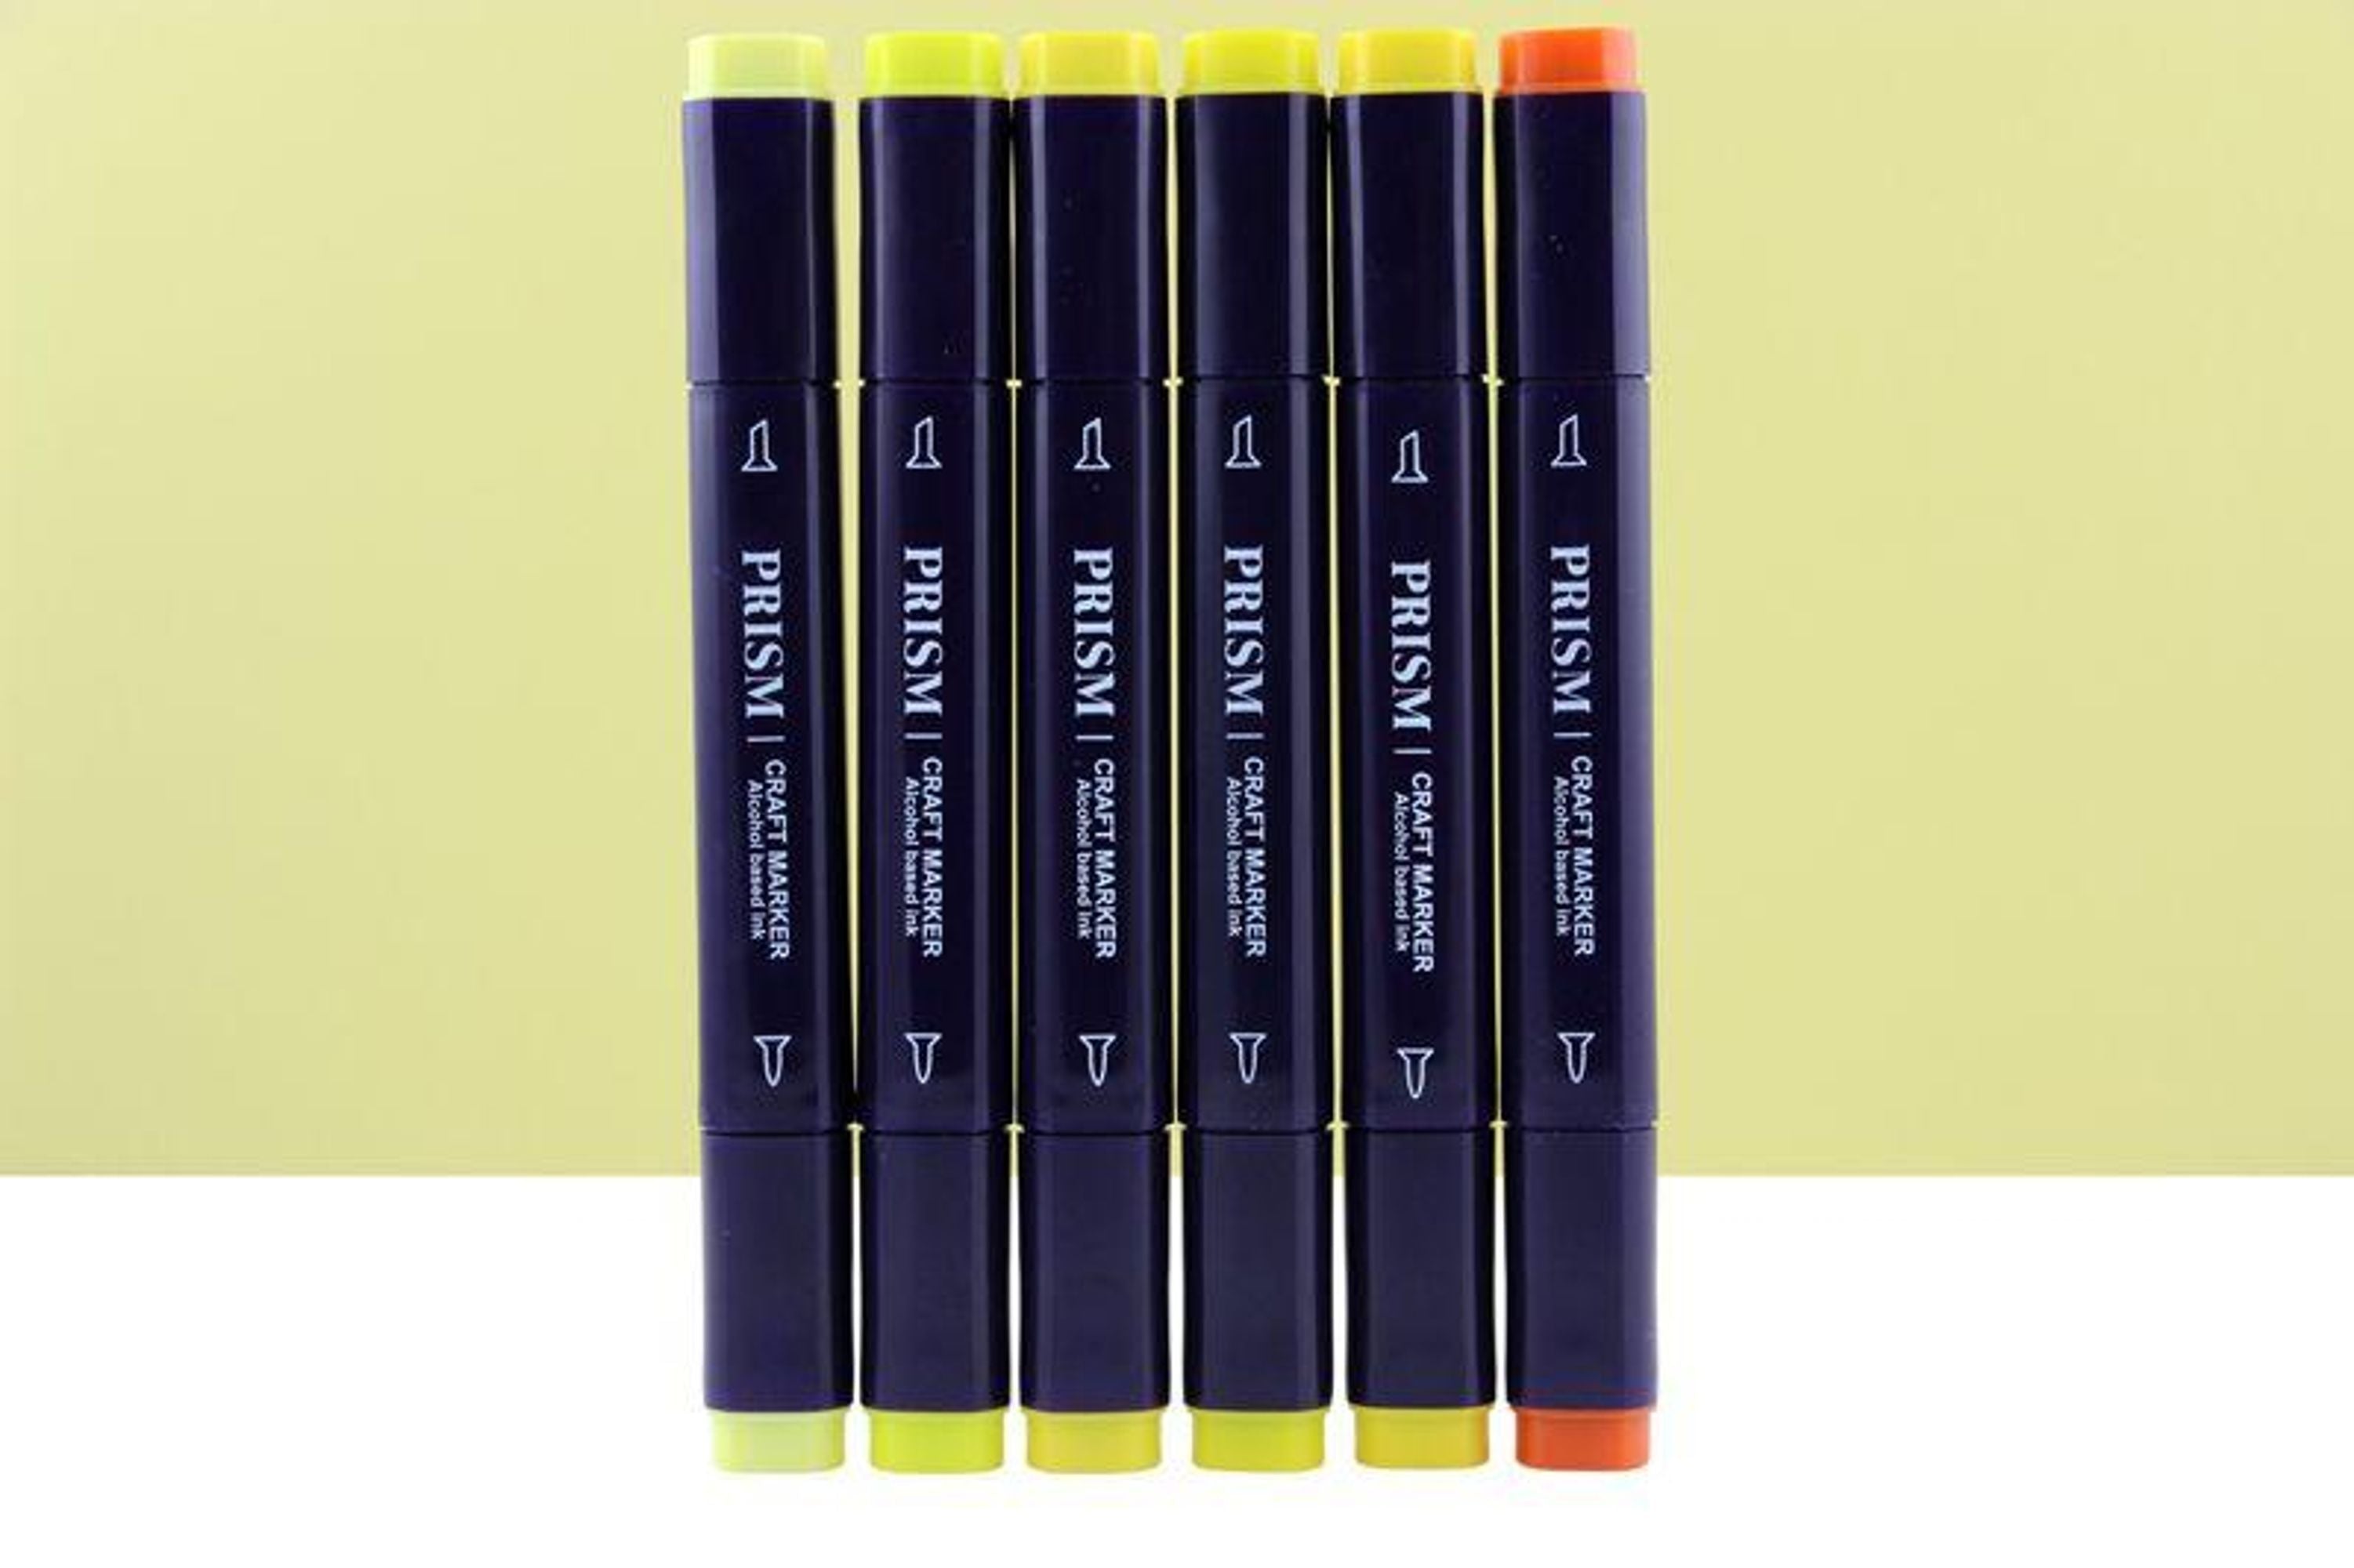 Prism Craft Markers Set 8 - Yellows x 6 Pens